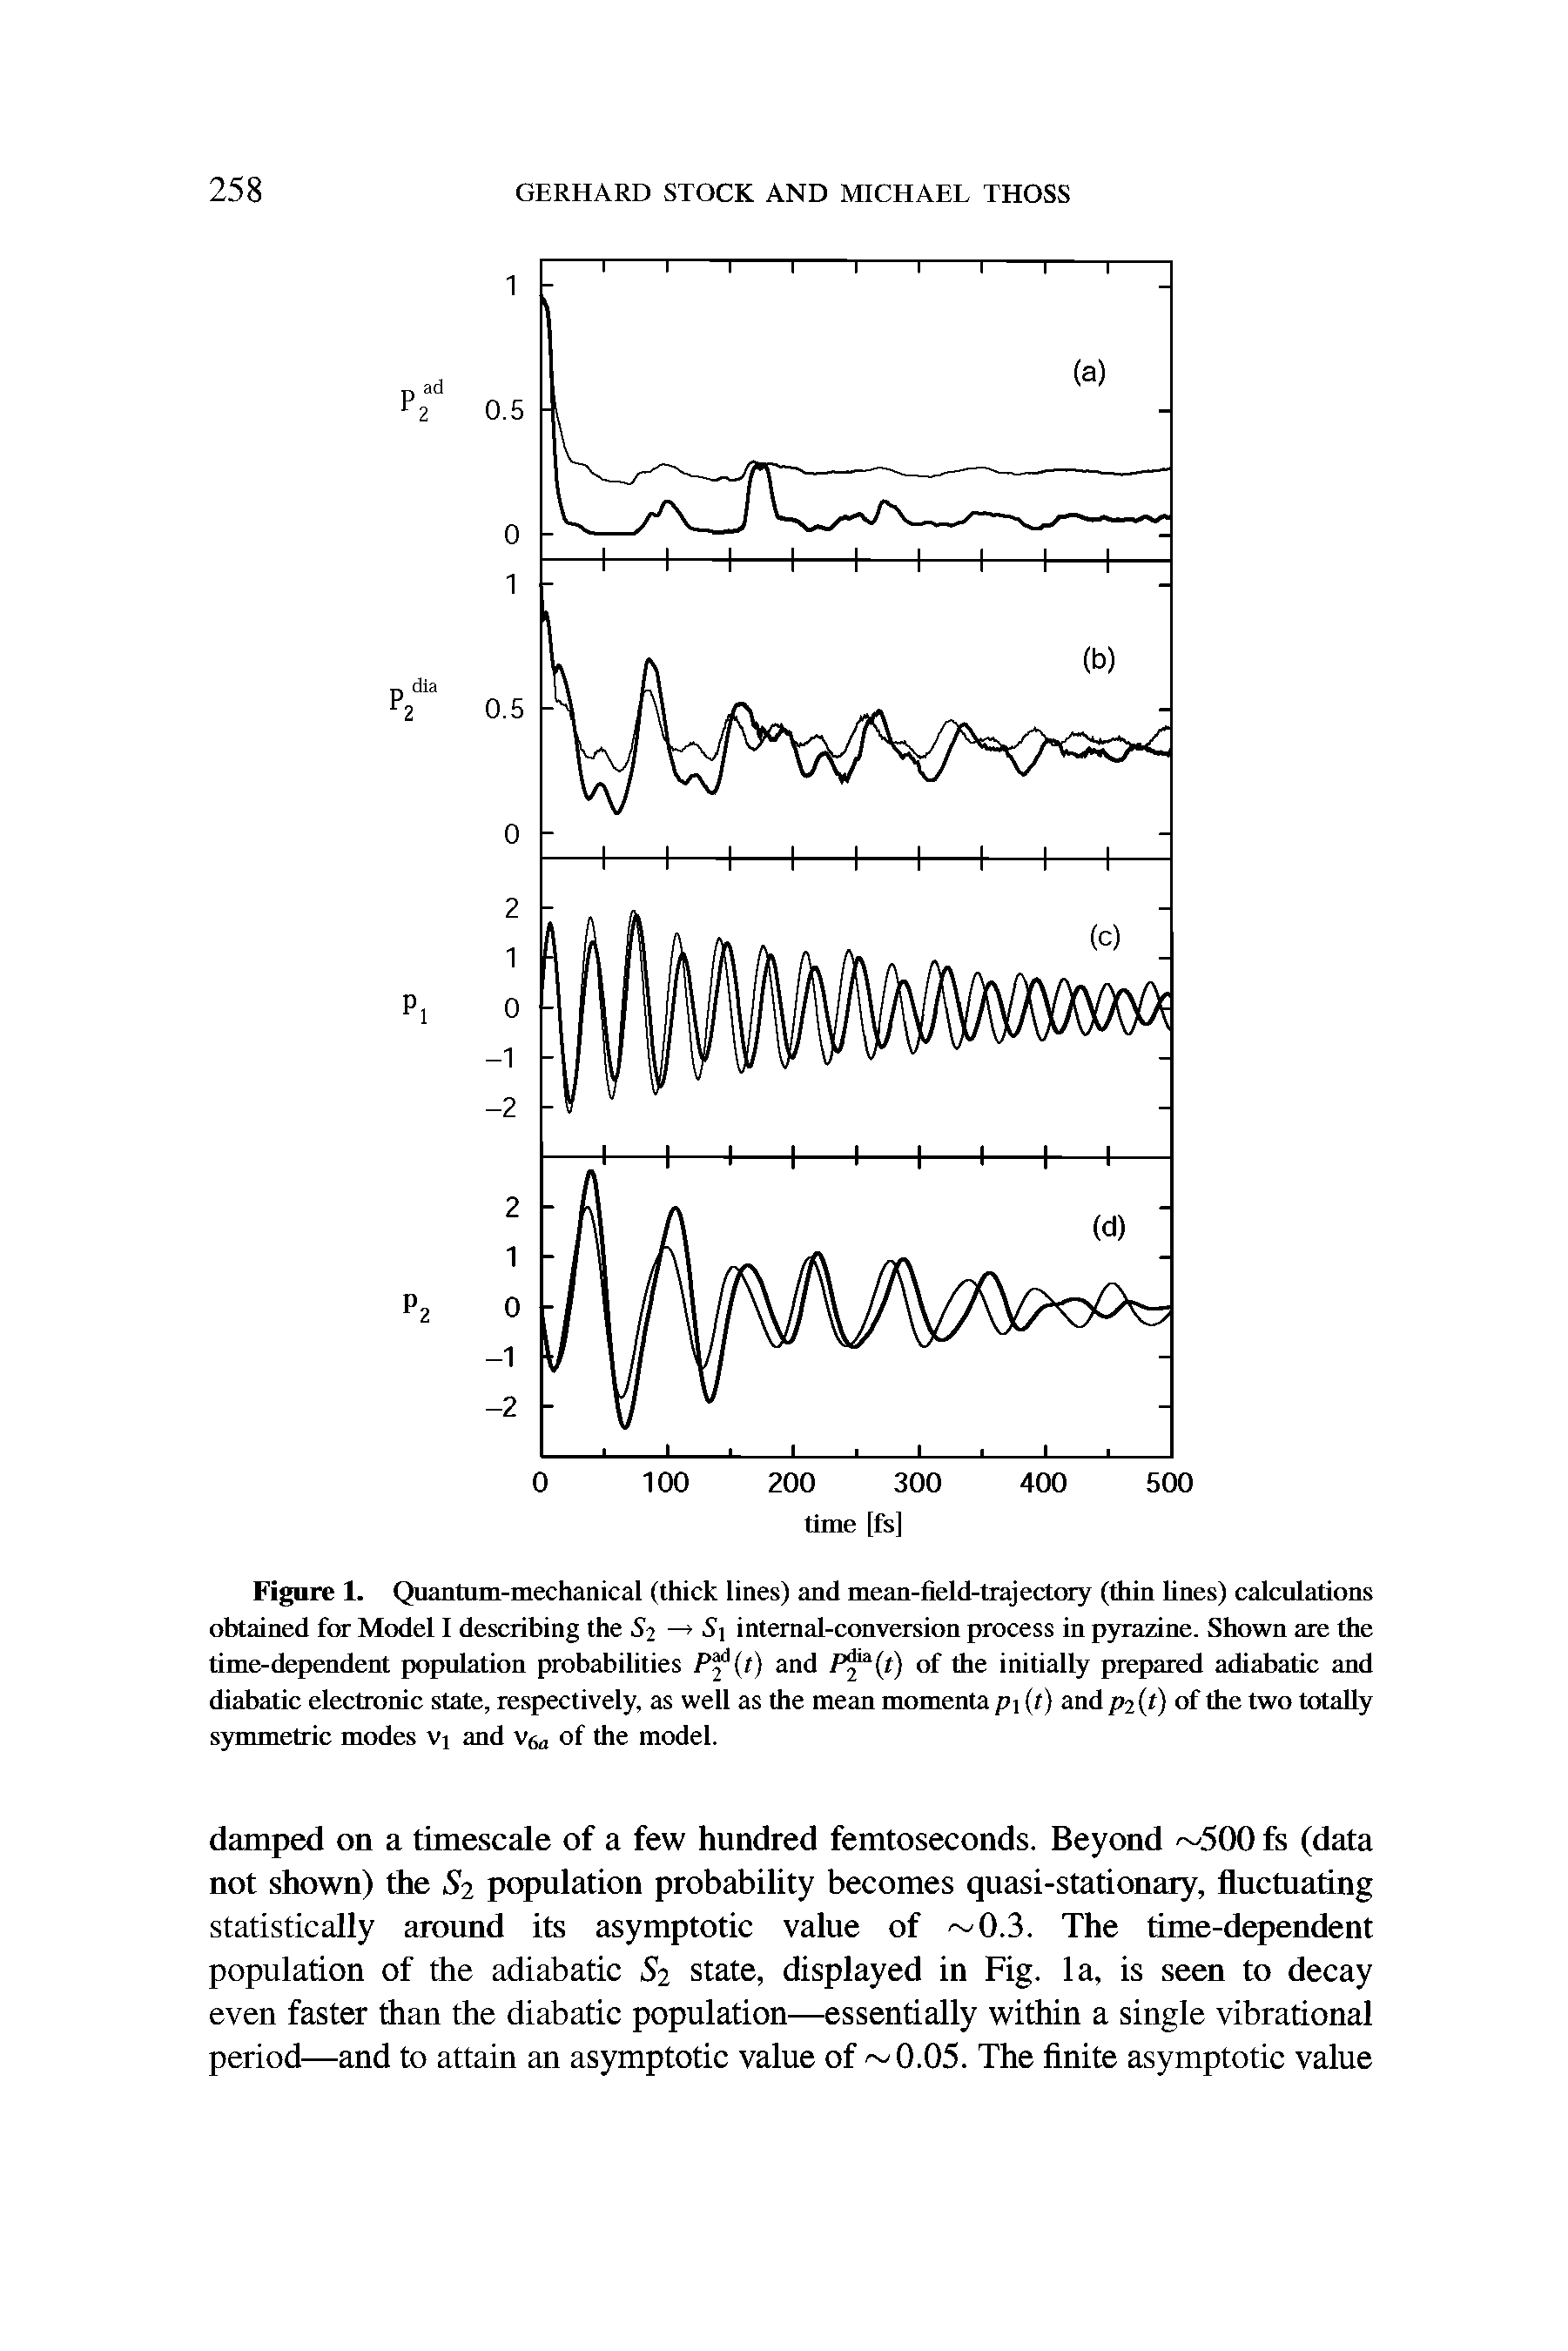 Figure 1. Quantum-mechanical (thick lines) and mean-field-trajectory (thin lines) calculations obtained for Model 1 describing the S2 — Si internal-conversion process in pyrazine. Shown are the time-dependent population probabilities Pf t) and Pf (t) of the initially prepared adiabatic and diabatic electronic state, respectively, as well as the mean momenta pi (t) and P2 t) of the two totally symmetric modes Vi and V( of the model.